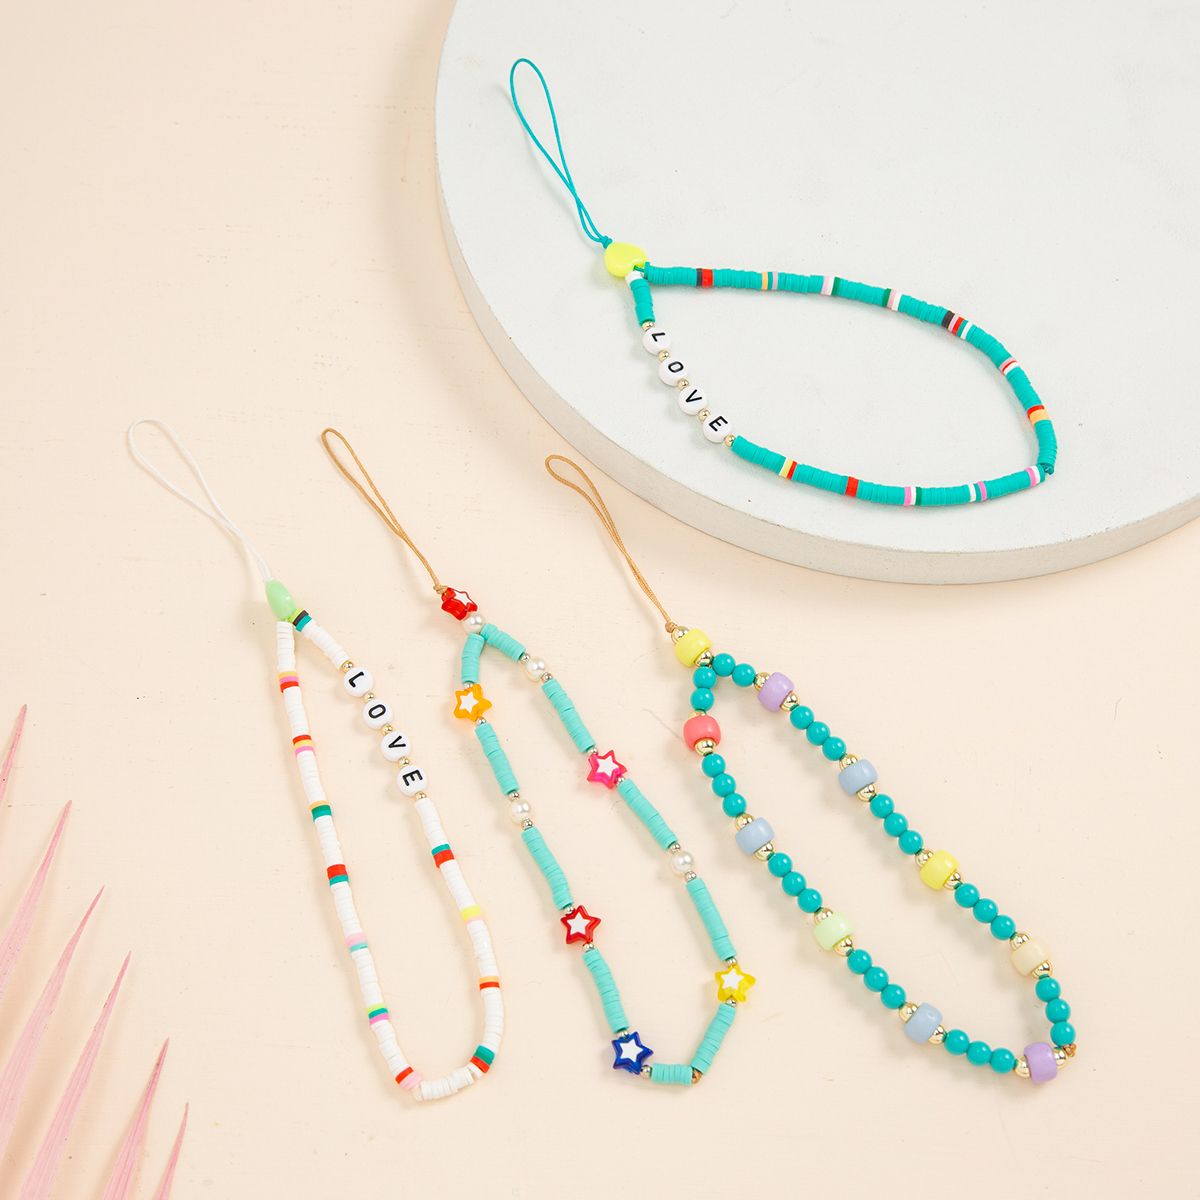 ADYQKU0DH Fashion Colorful Women Acrylic Bead Cell Phone Case Hanging Cord Soft Pottery Rope Phone Chain Mobile Phone Strap Lanyard